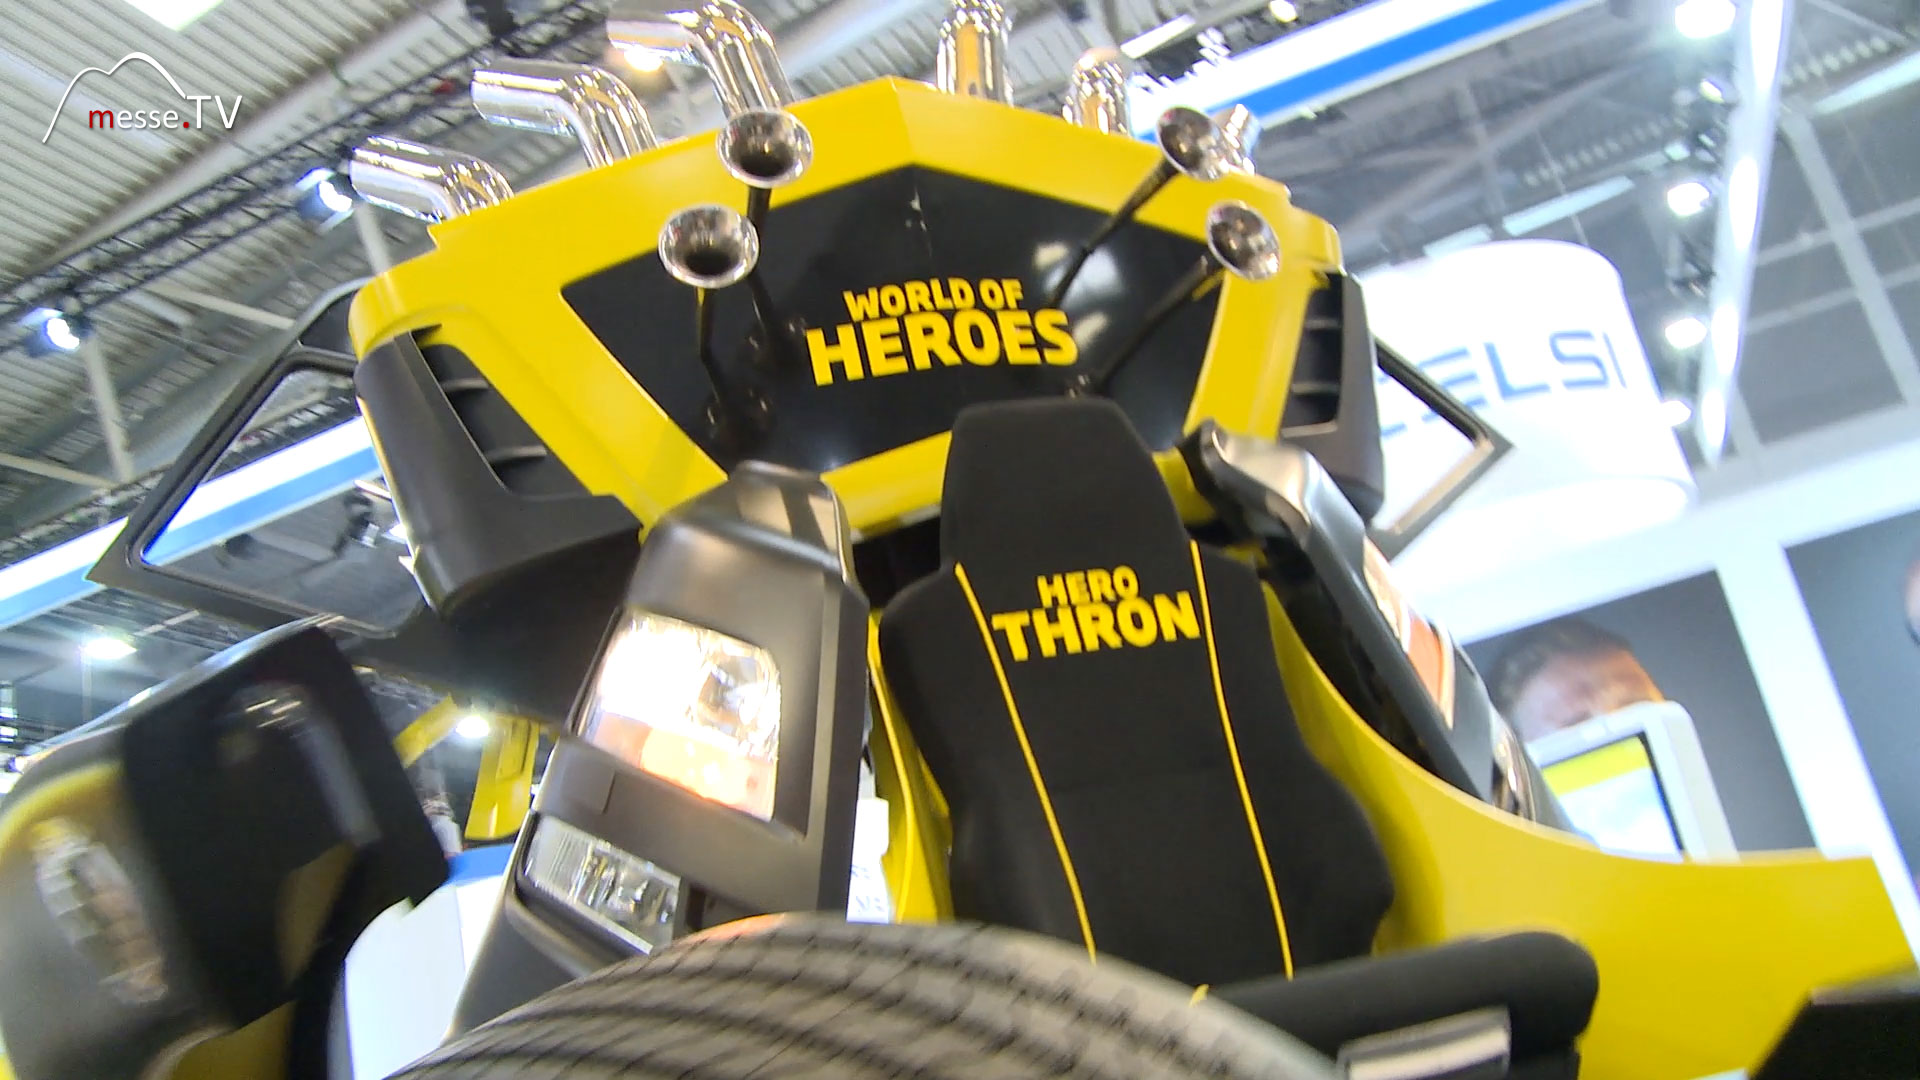 TRUCK JOBS World of Heroes Throne at the booth